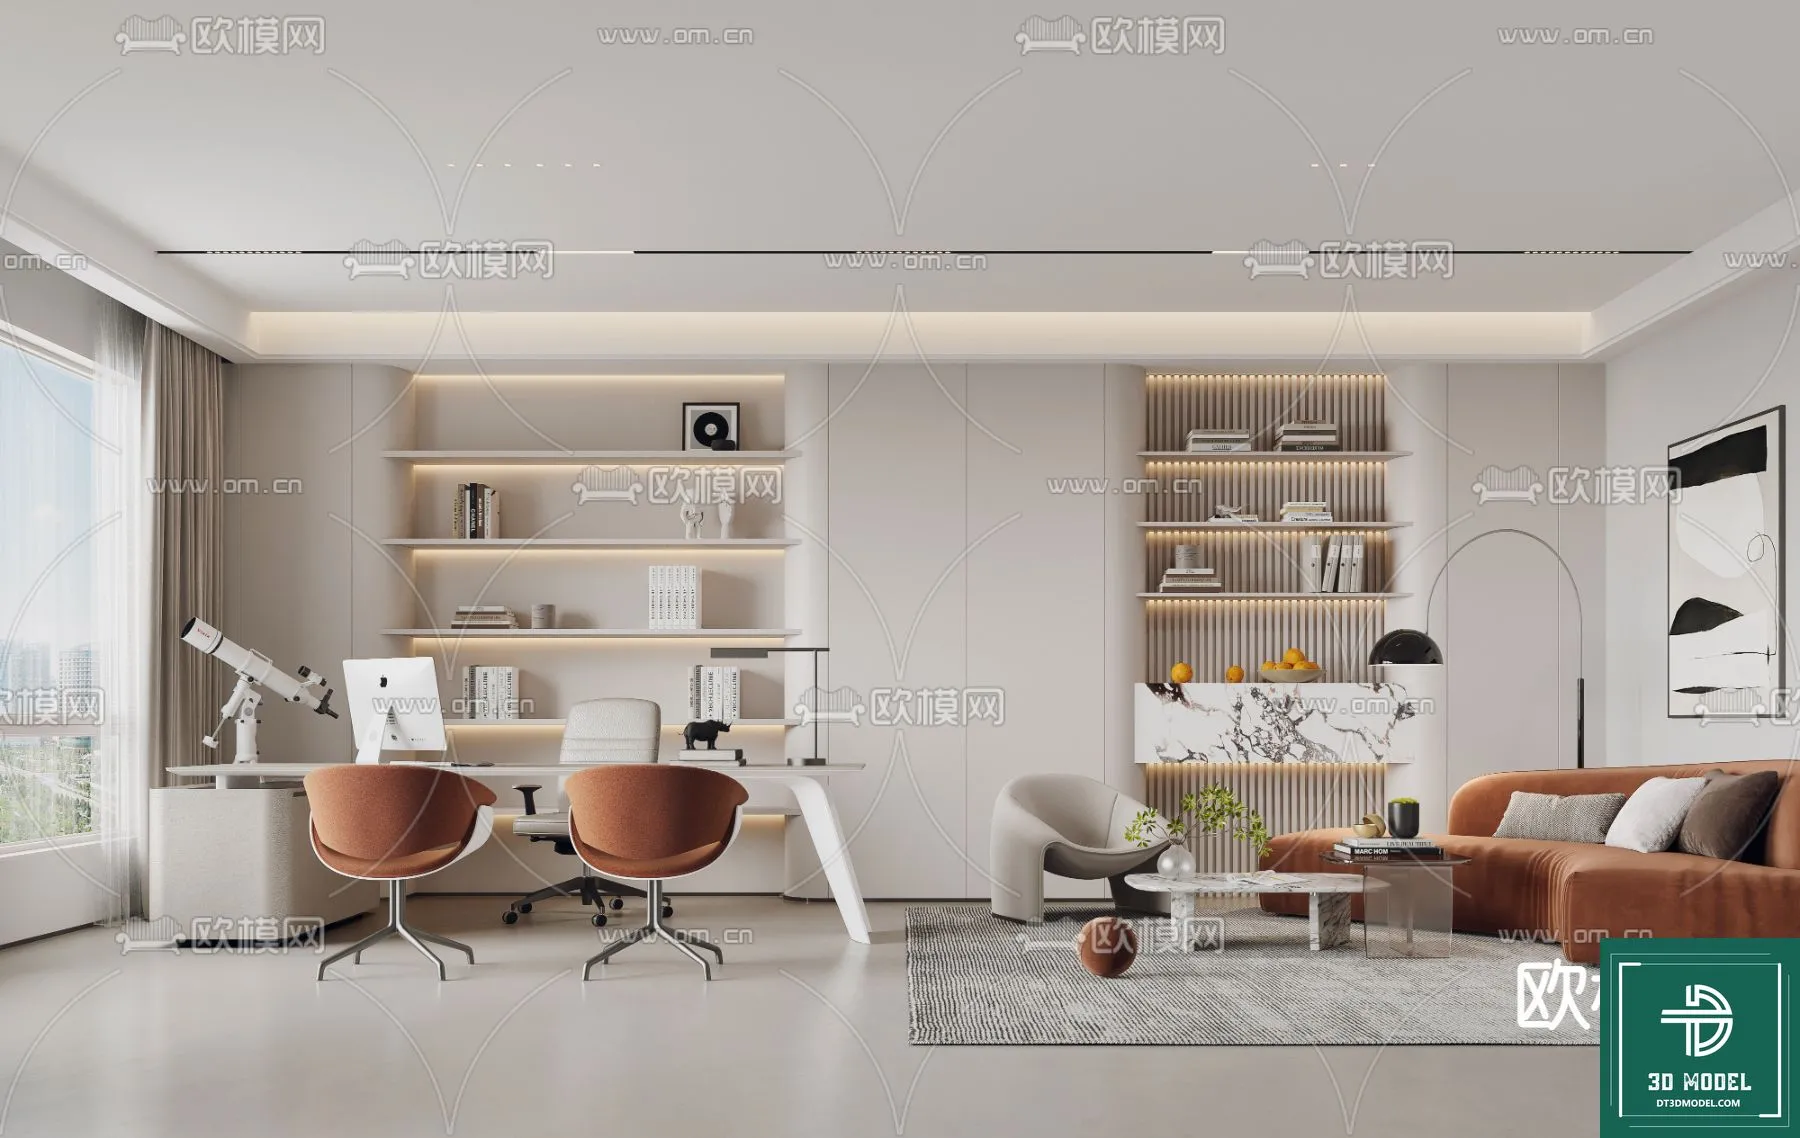 OFFICE ROOM FOR MANAGER – 3DMODEL – 098